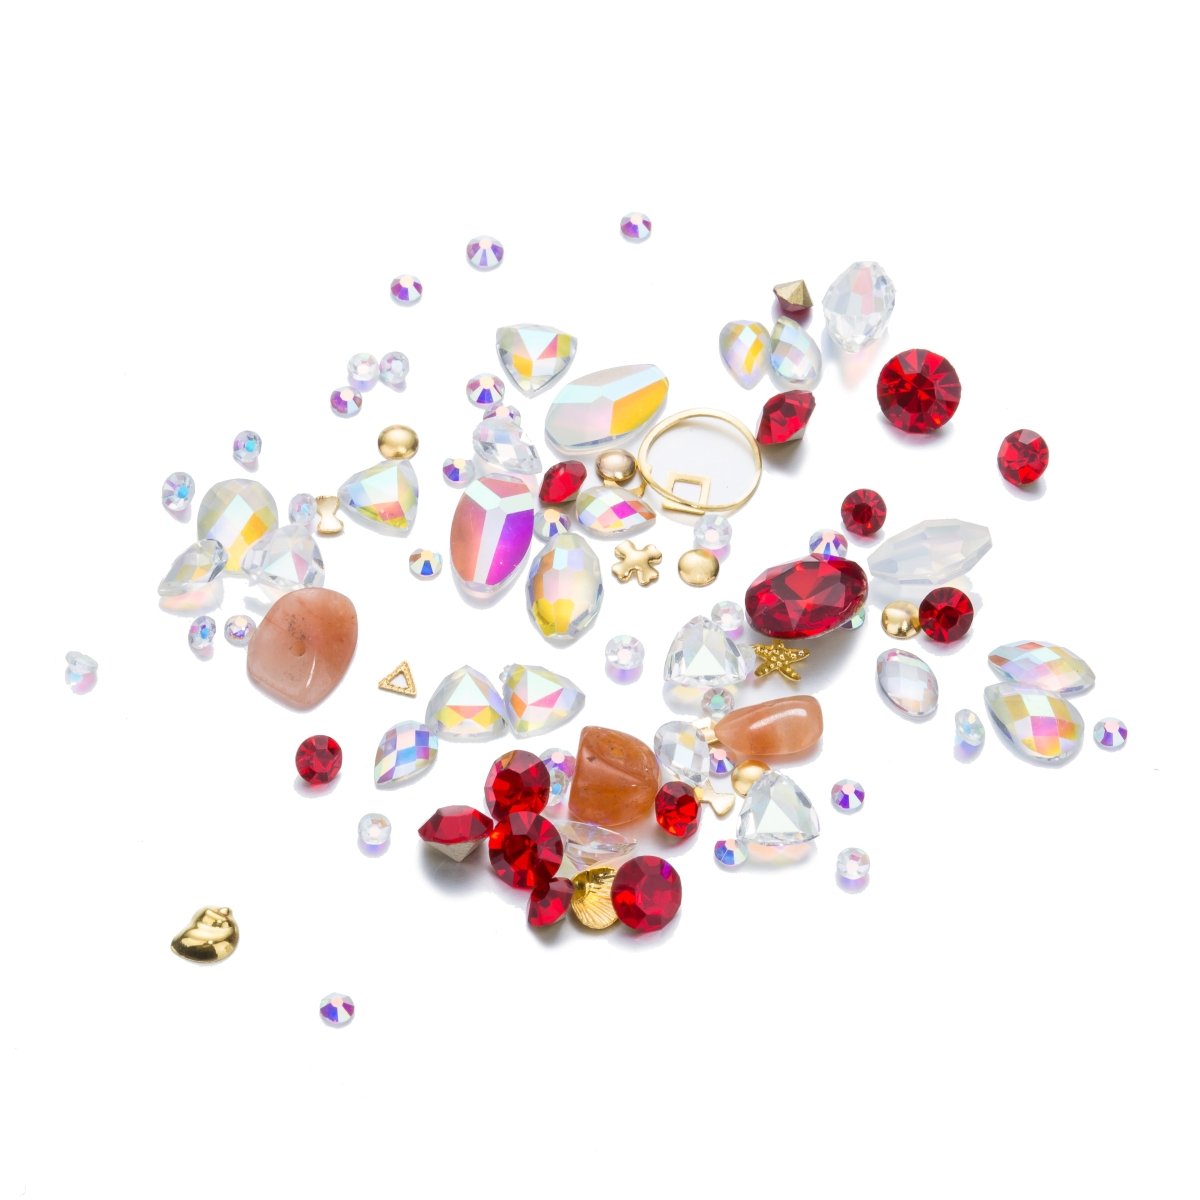 Mixed Crystal - Crystal AB, Bright Red Light Siam Crystal and Yellow Topaz Crystal - DLUXCA